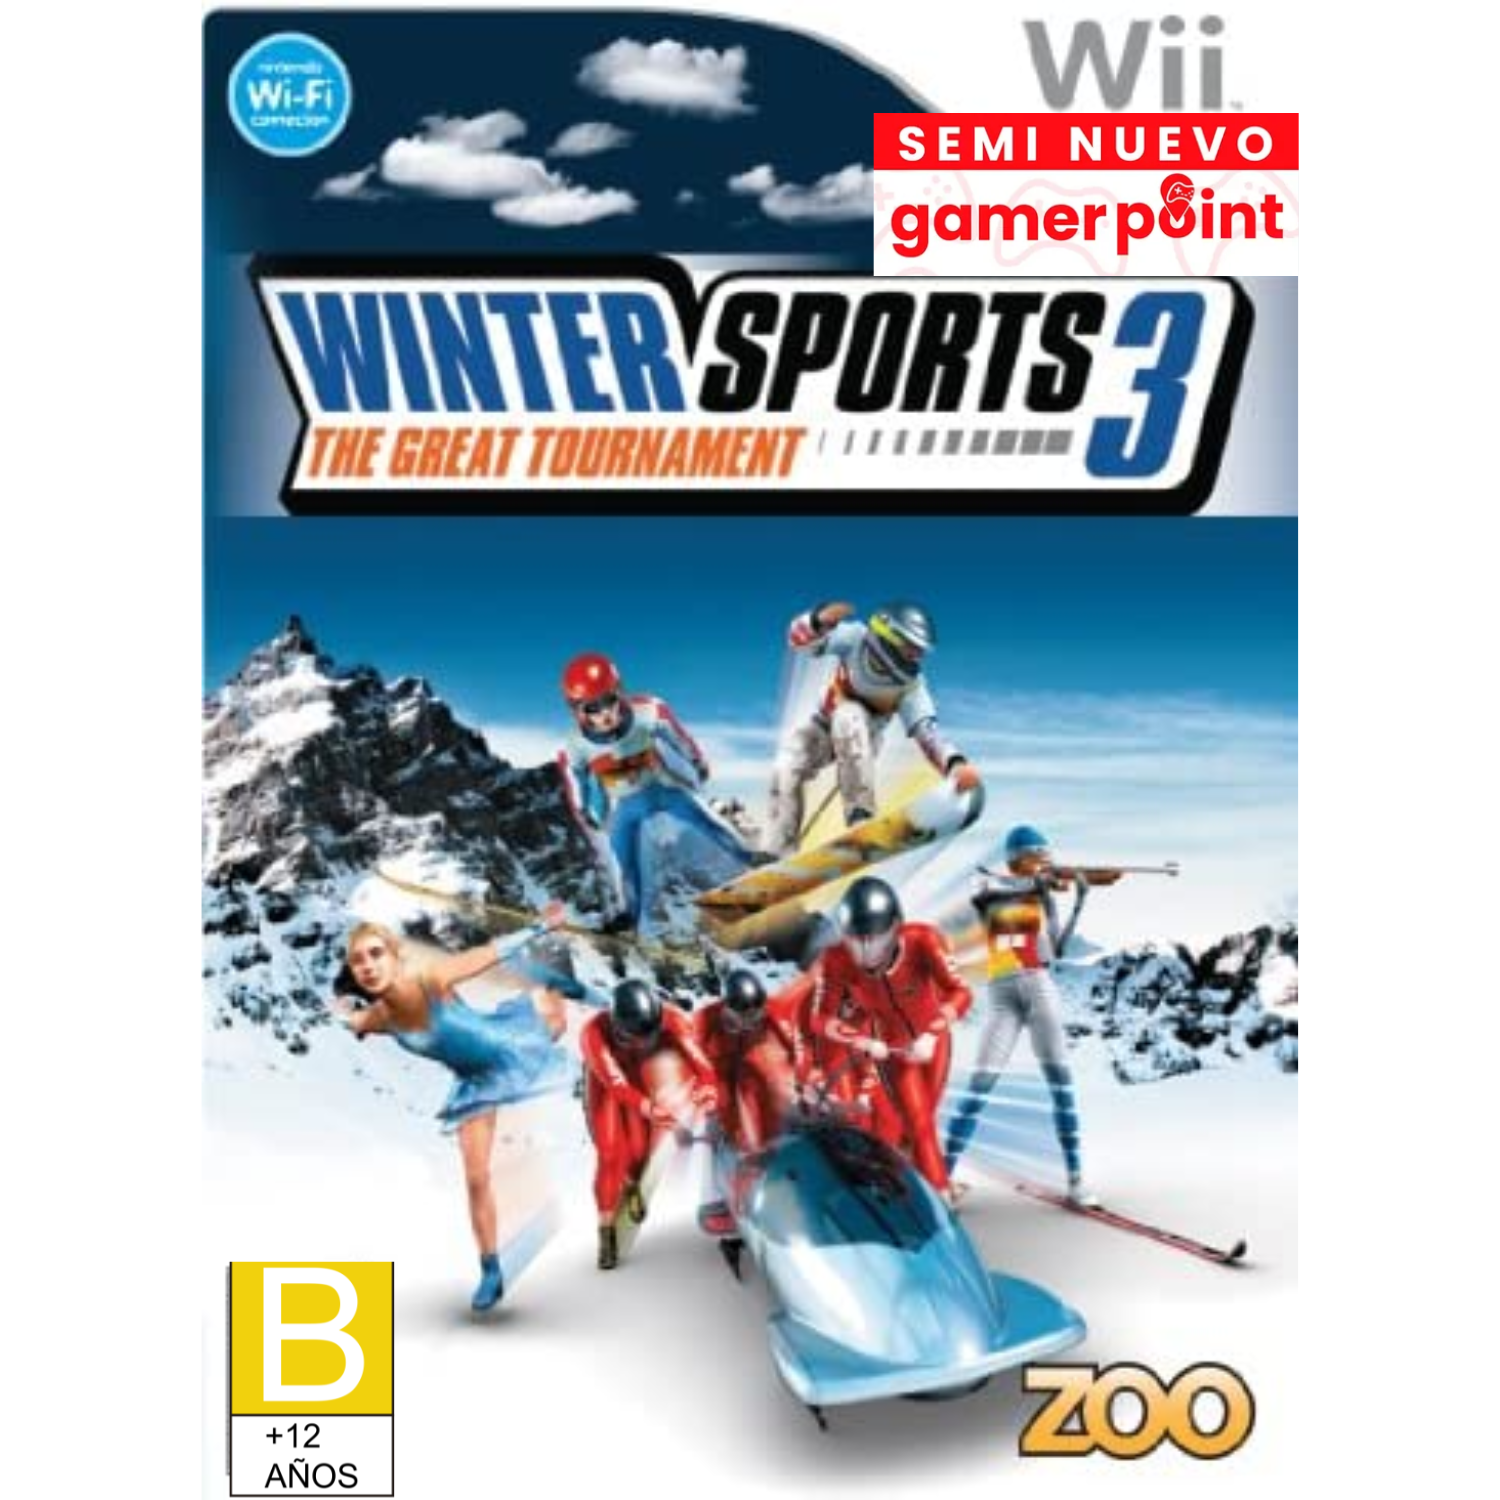 Winter Sports 3 The Great Tournament Wii Usado